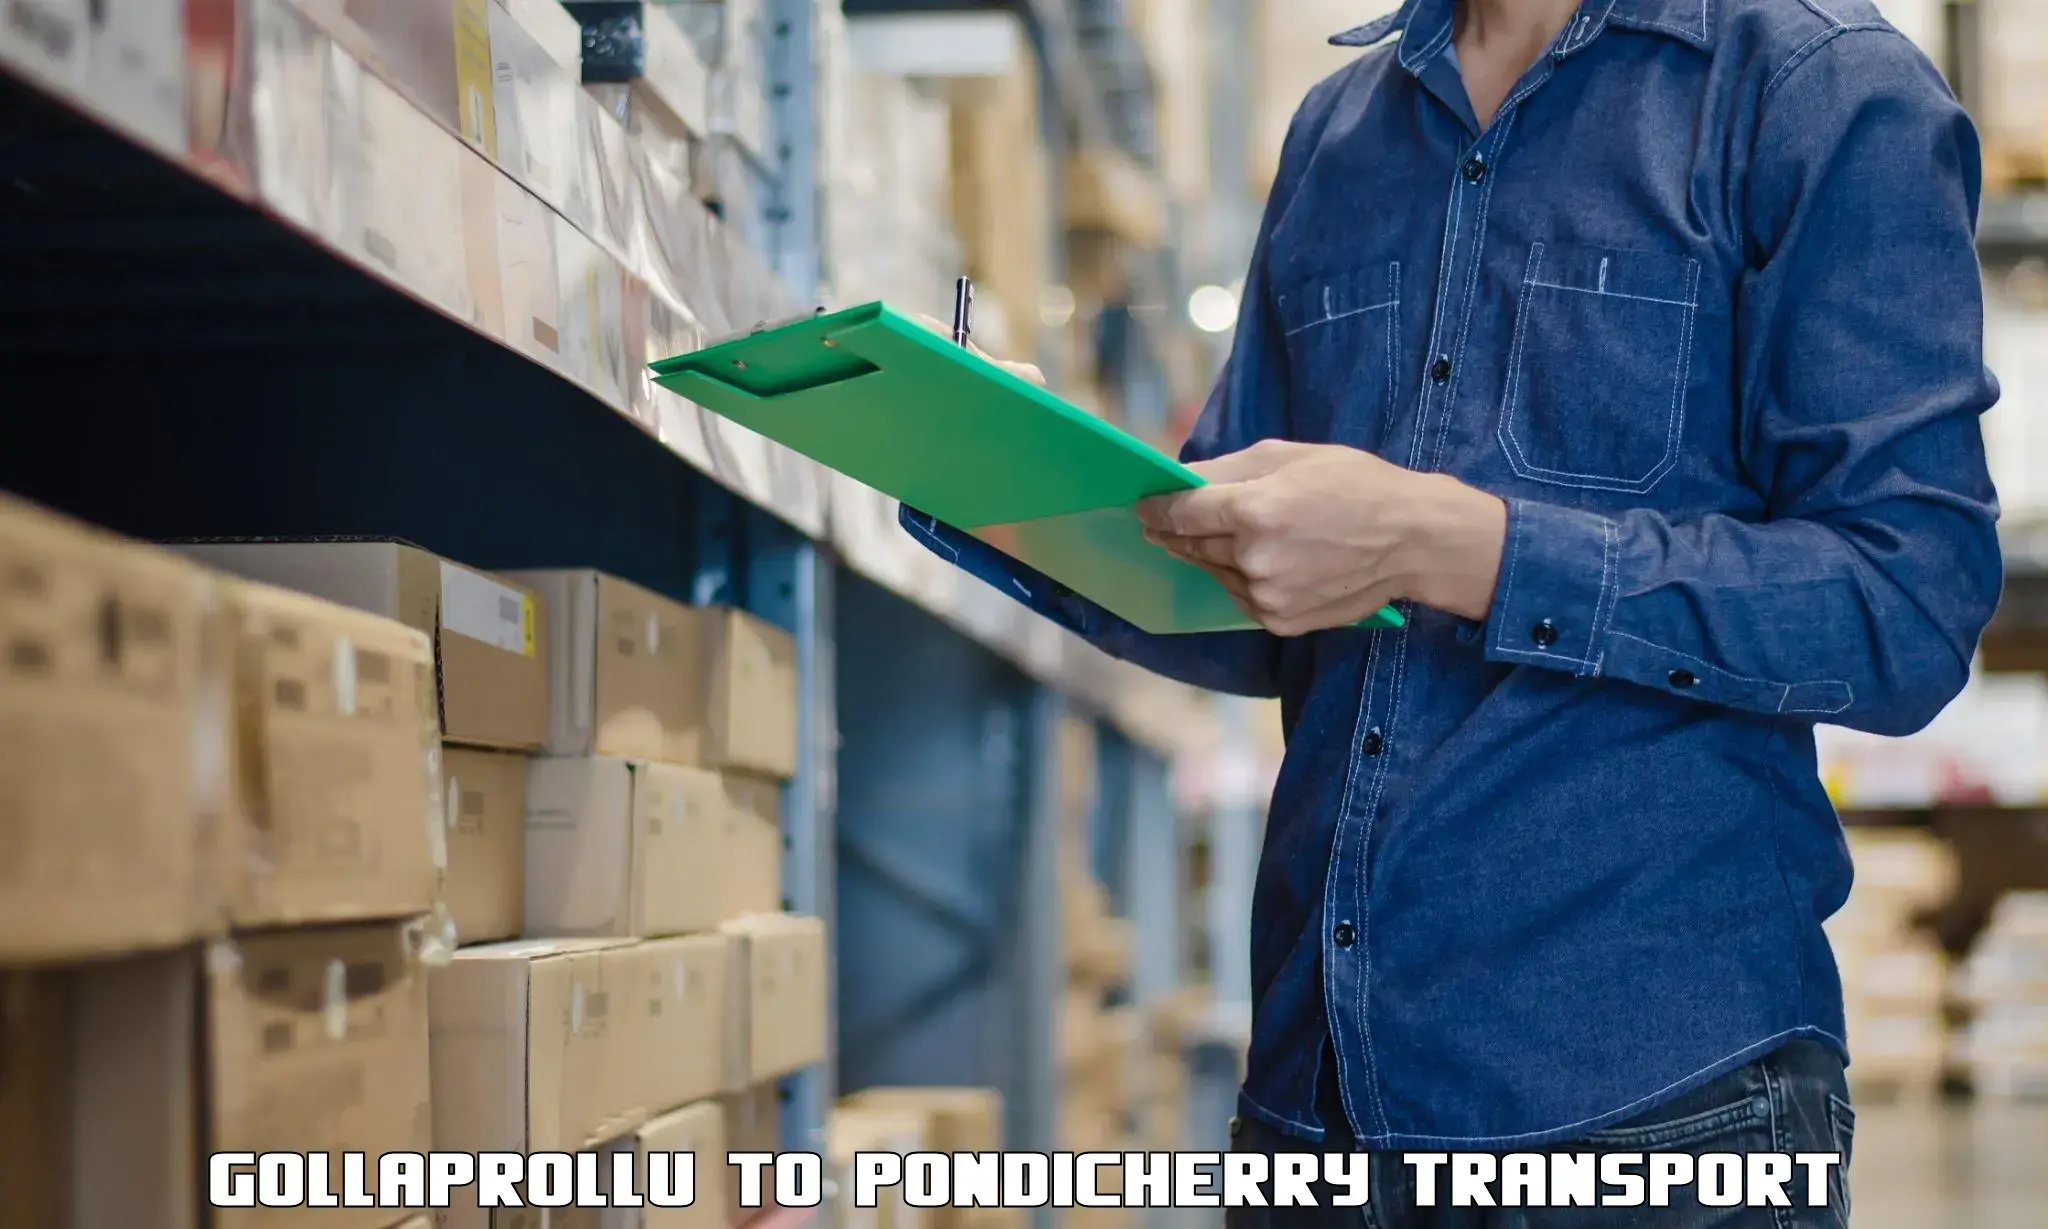 Luggage transport services Gollaprollu to NIT Puducherry